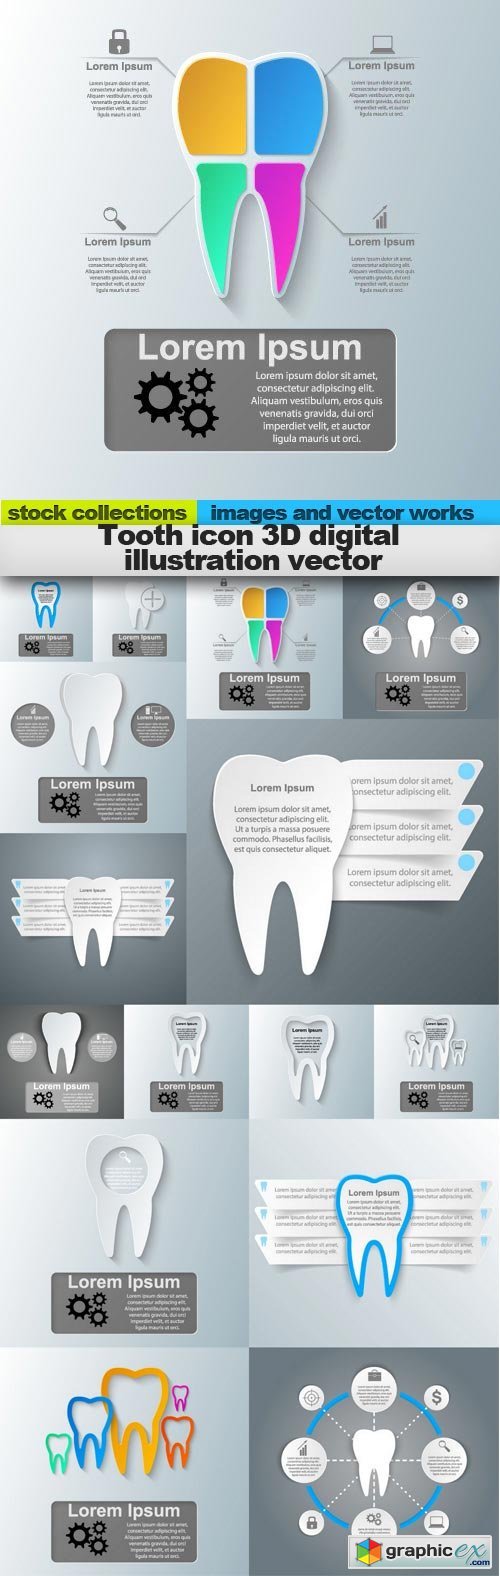 Tooth icon 3D digital illustration vector, 15 x EPS